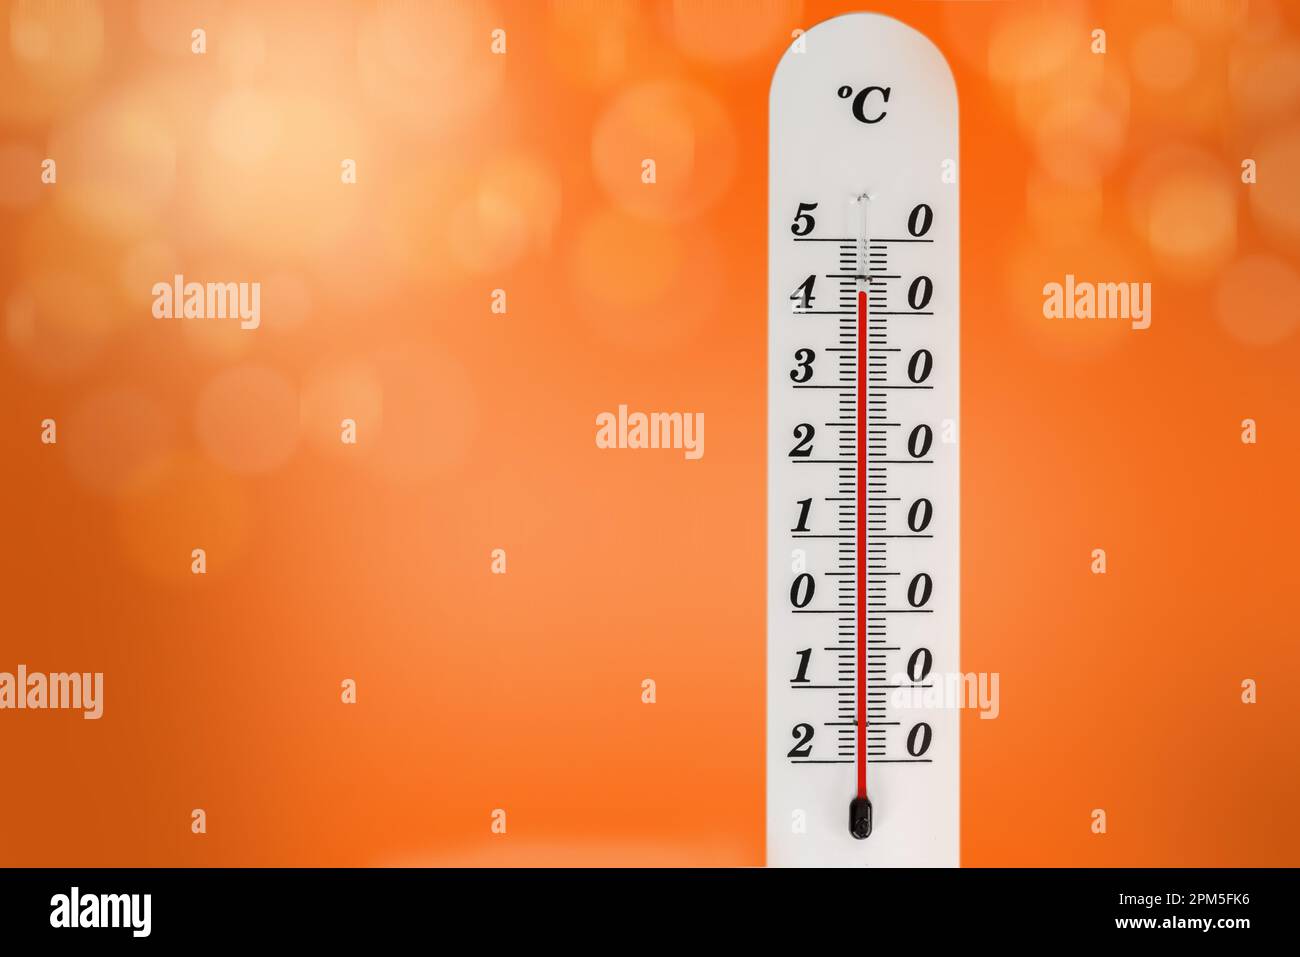 https://c8.alamy.com/comp/2PM5FK6/42-degrees-celsius-on-a-thermometer-global-warming-concept-2PM5FK6.jpg